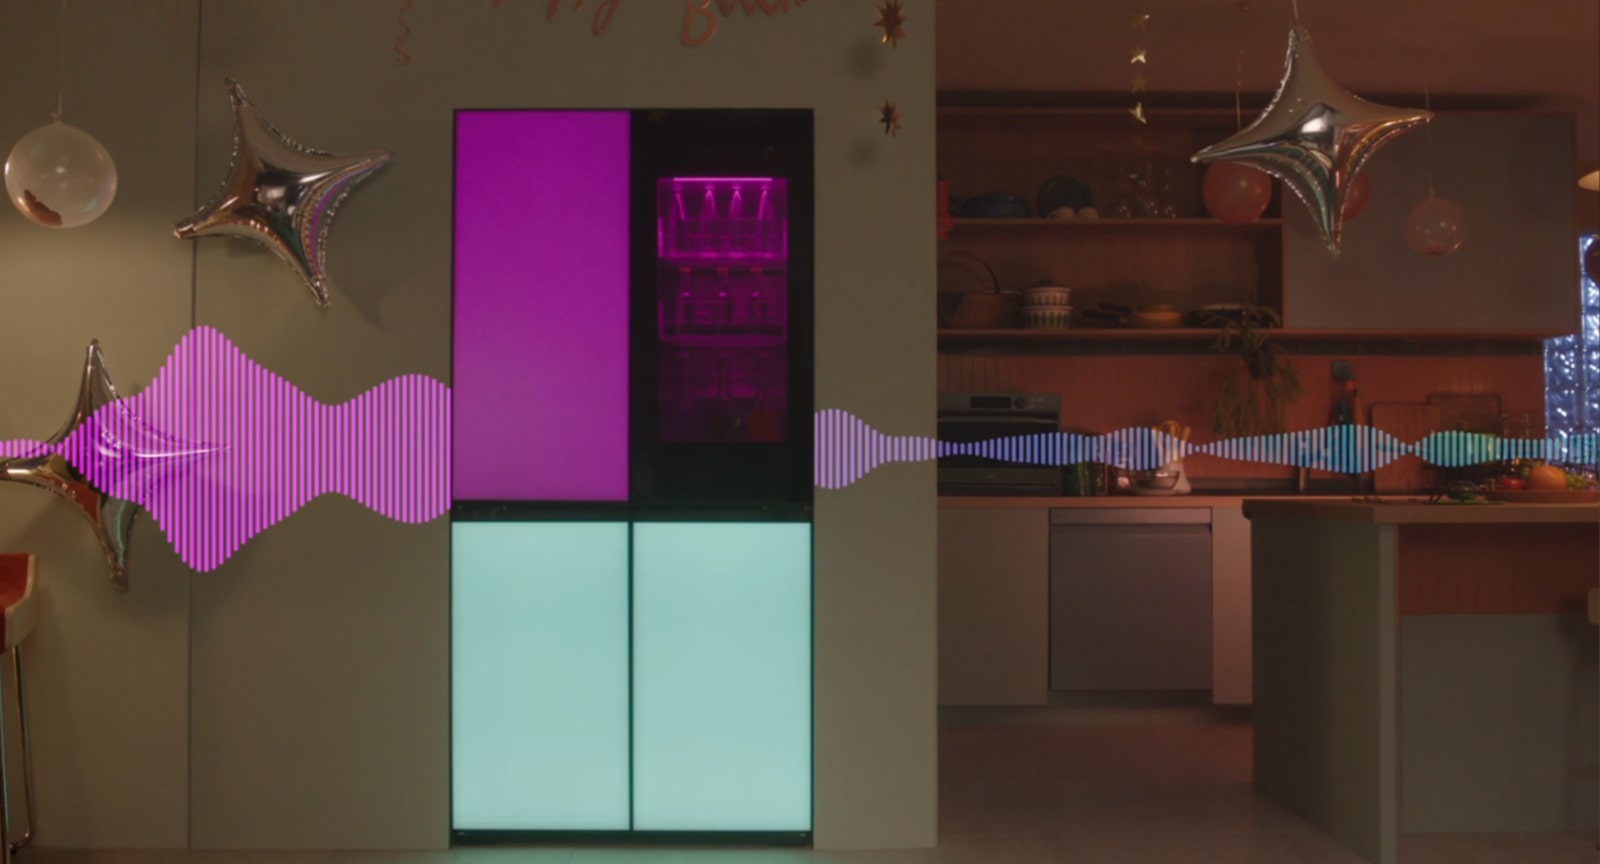 A video where music is played and sound waves are seen behind the product